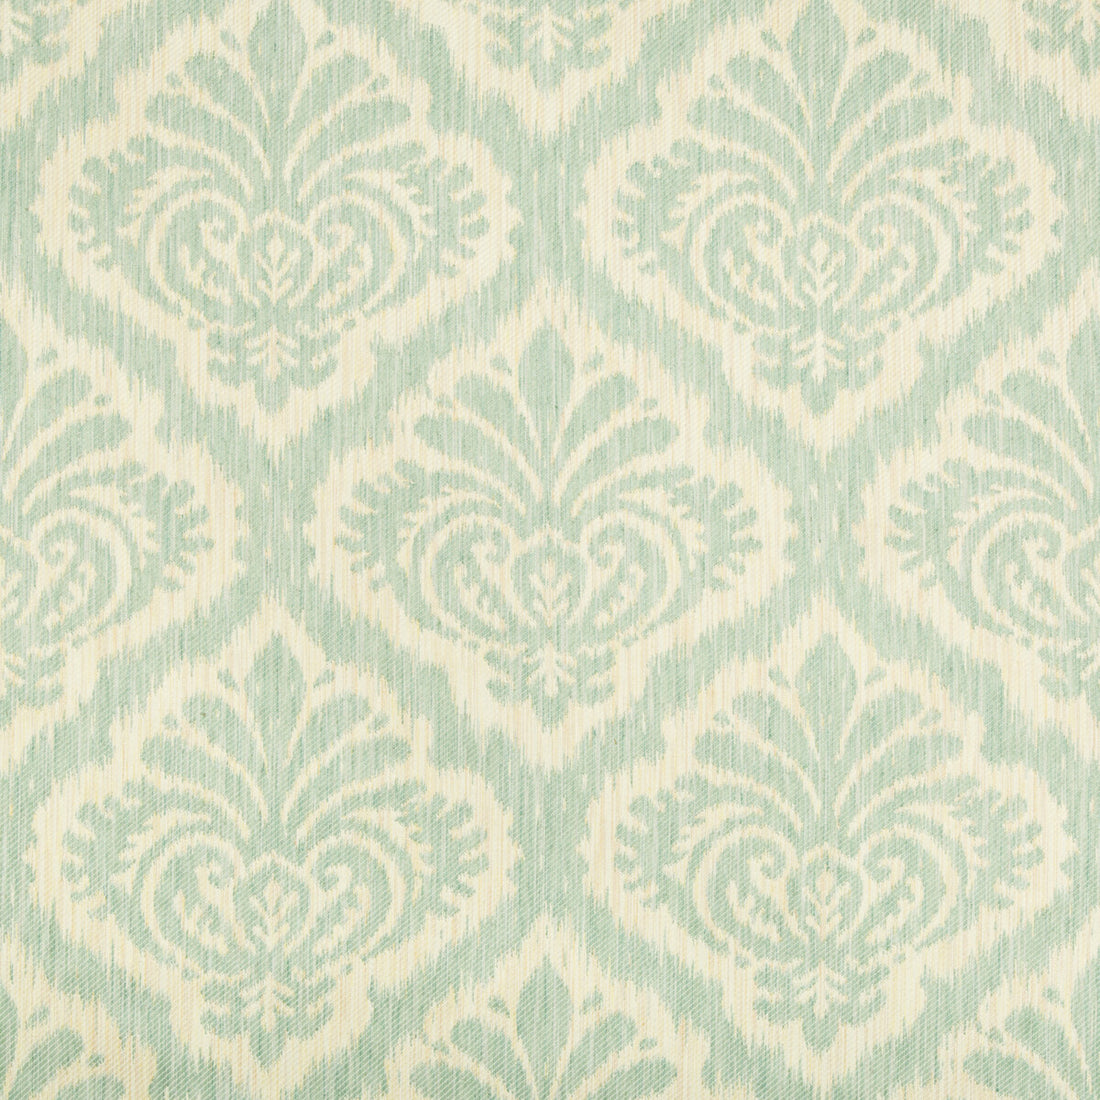 Durbar Tait Strie II fabric in aqua color - pattern 8017137.13.0 - by Brunschwig &amp; Fils in the Baronet collection